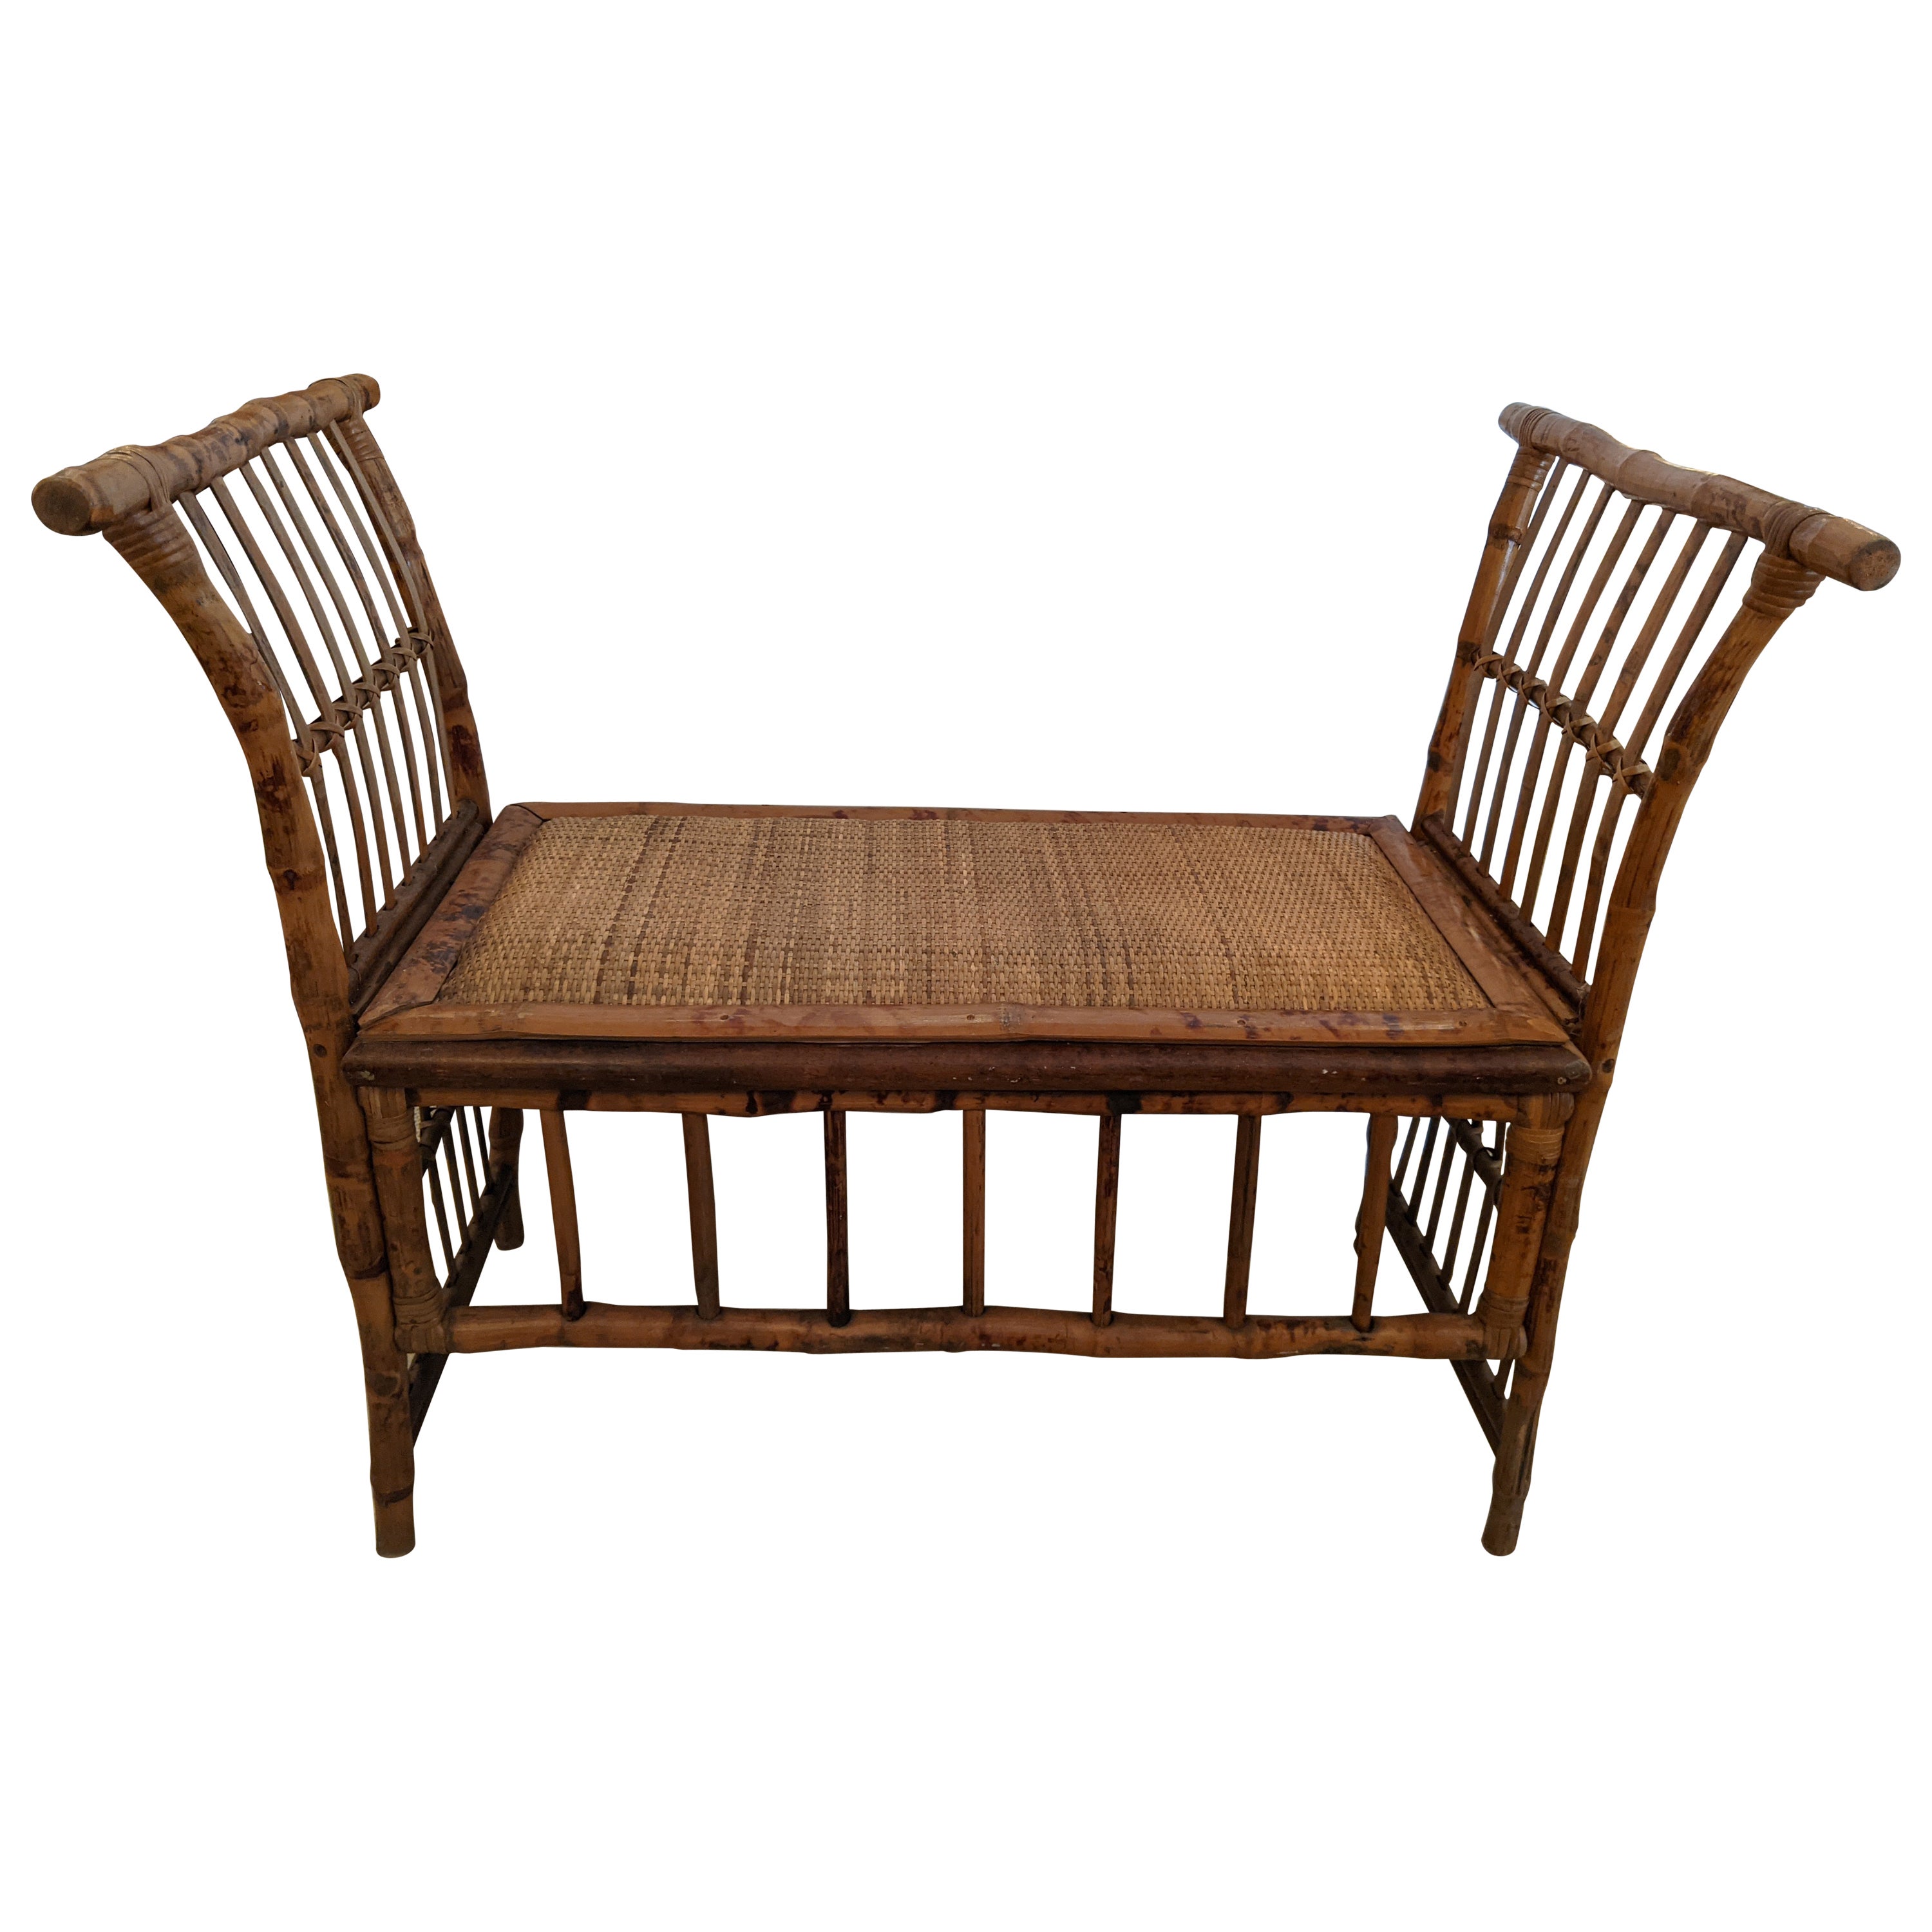 Great Looking Vintage Faux Bamboo Rattan Bench